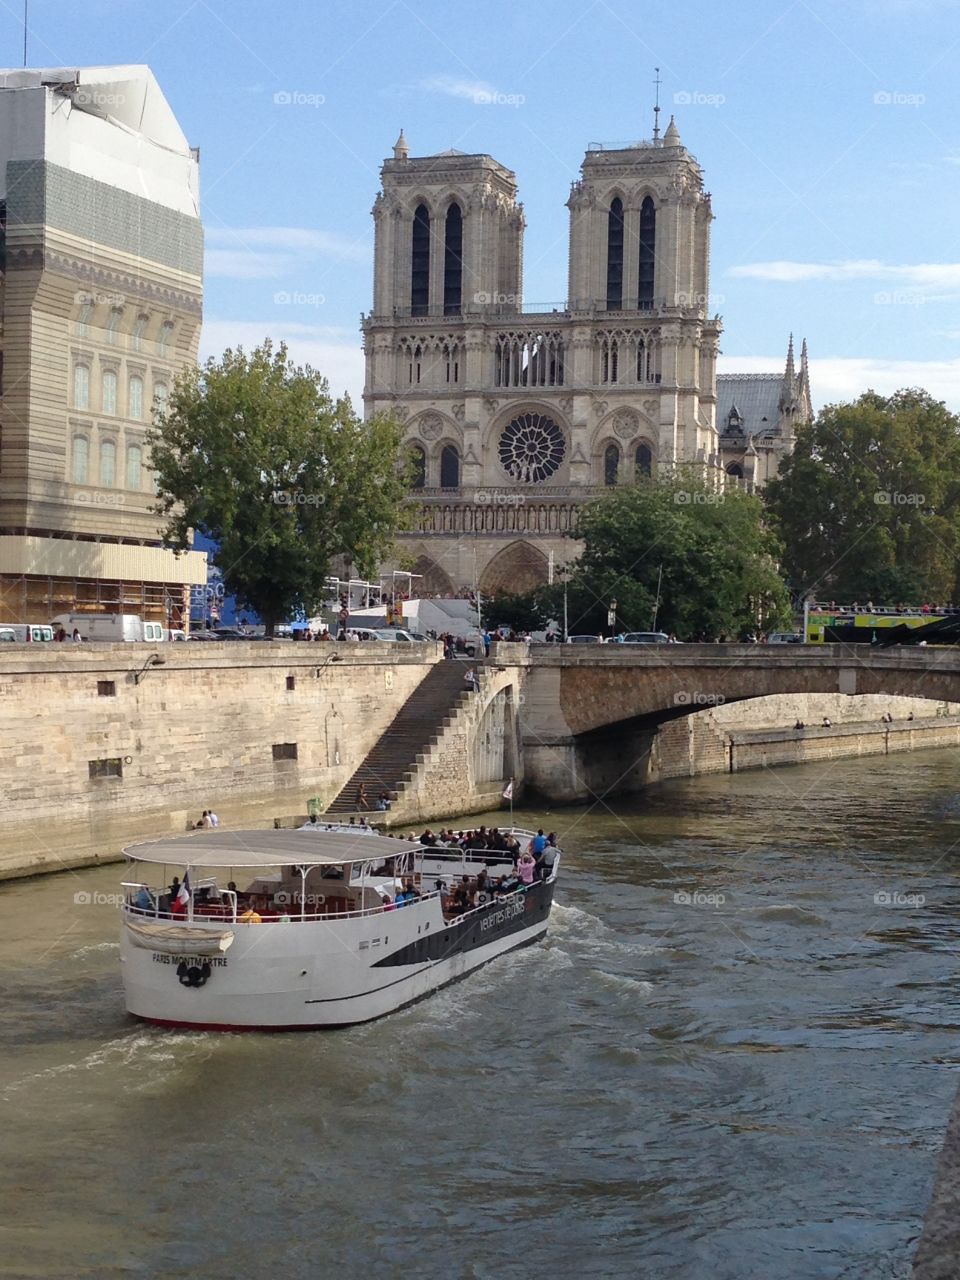 Notre Dame cathedral across the Seine River, with tour boat. 